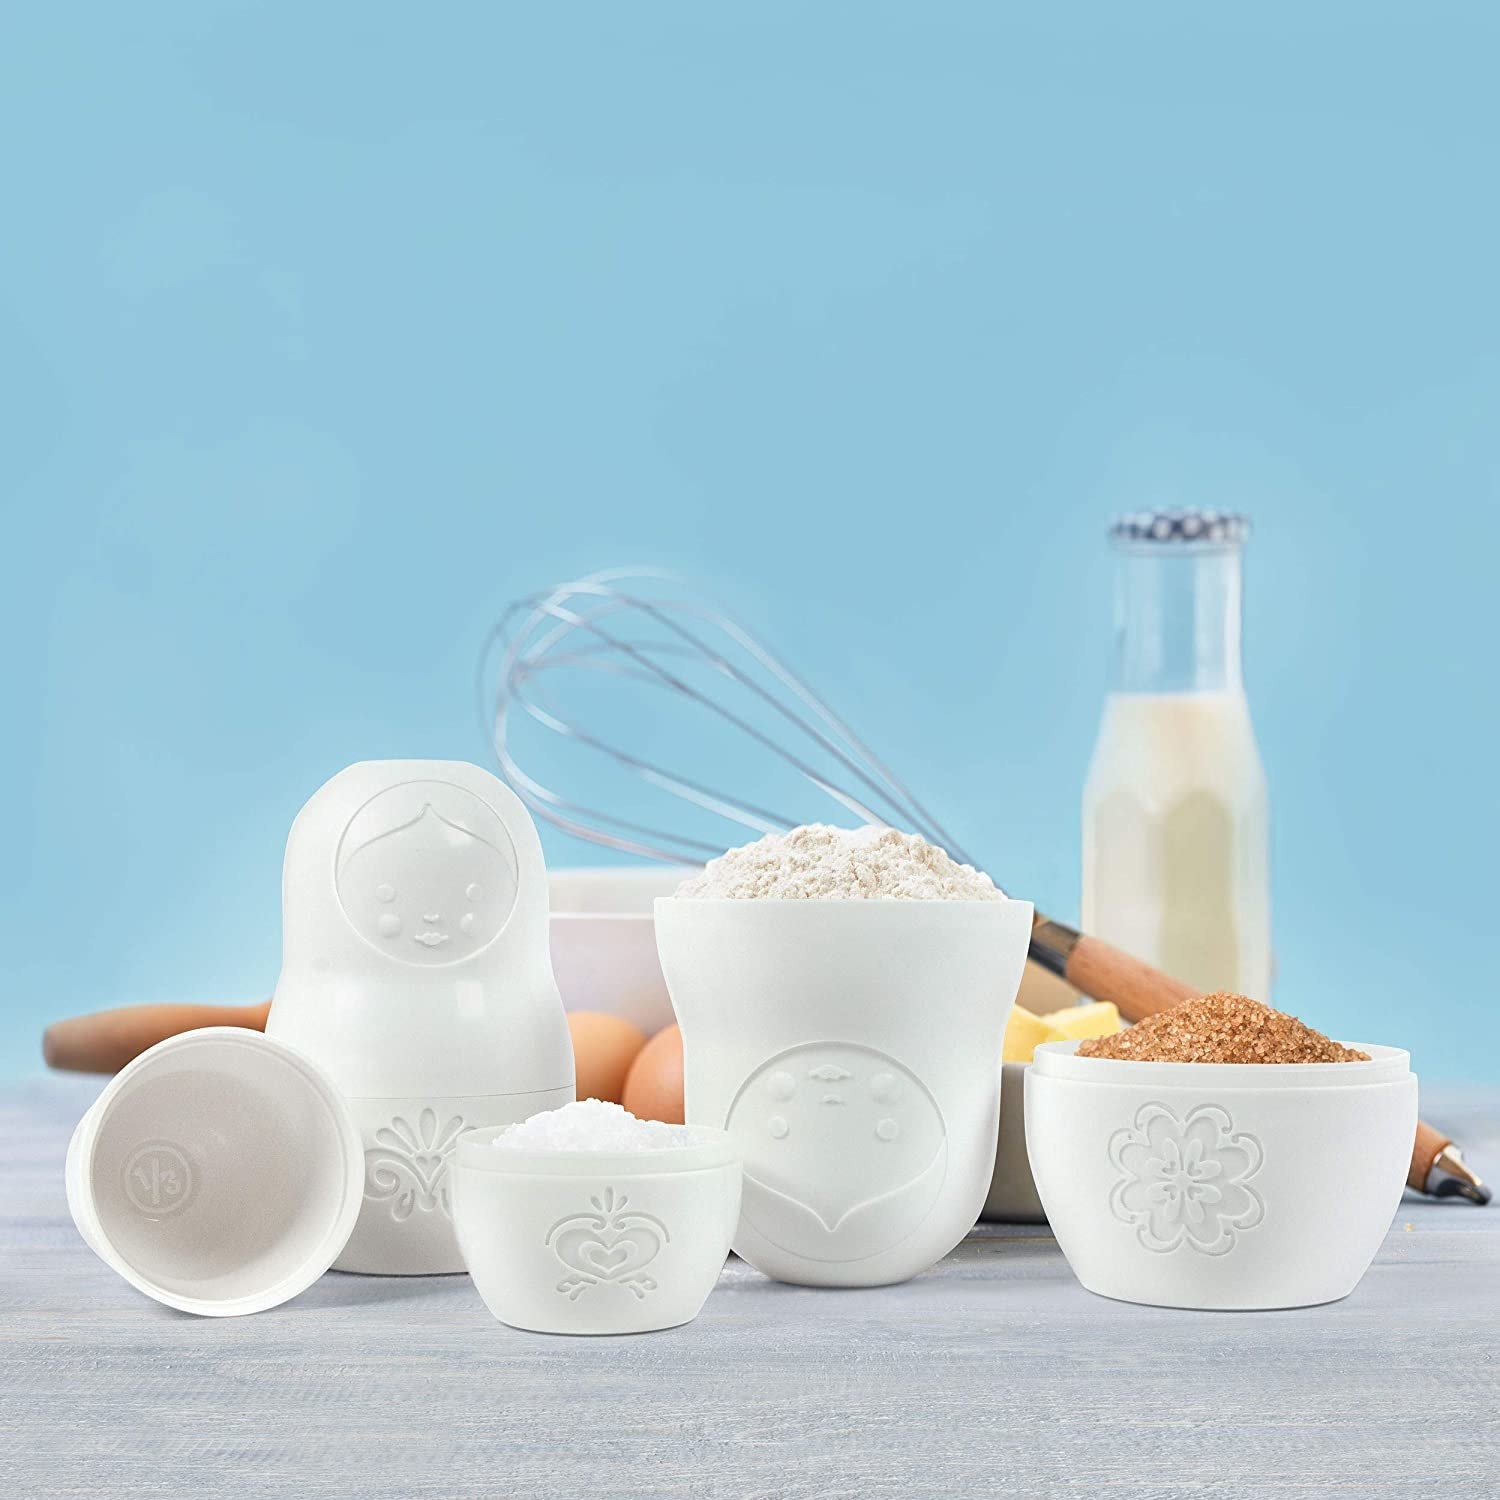 A product shot of the measuring cups filled with sugars 